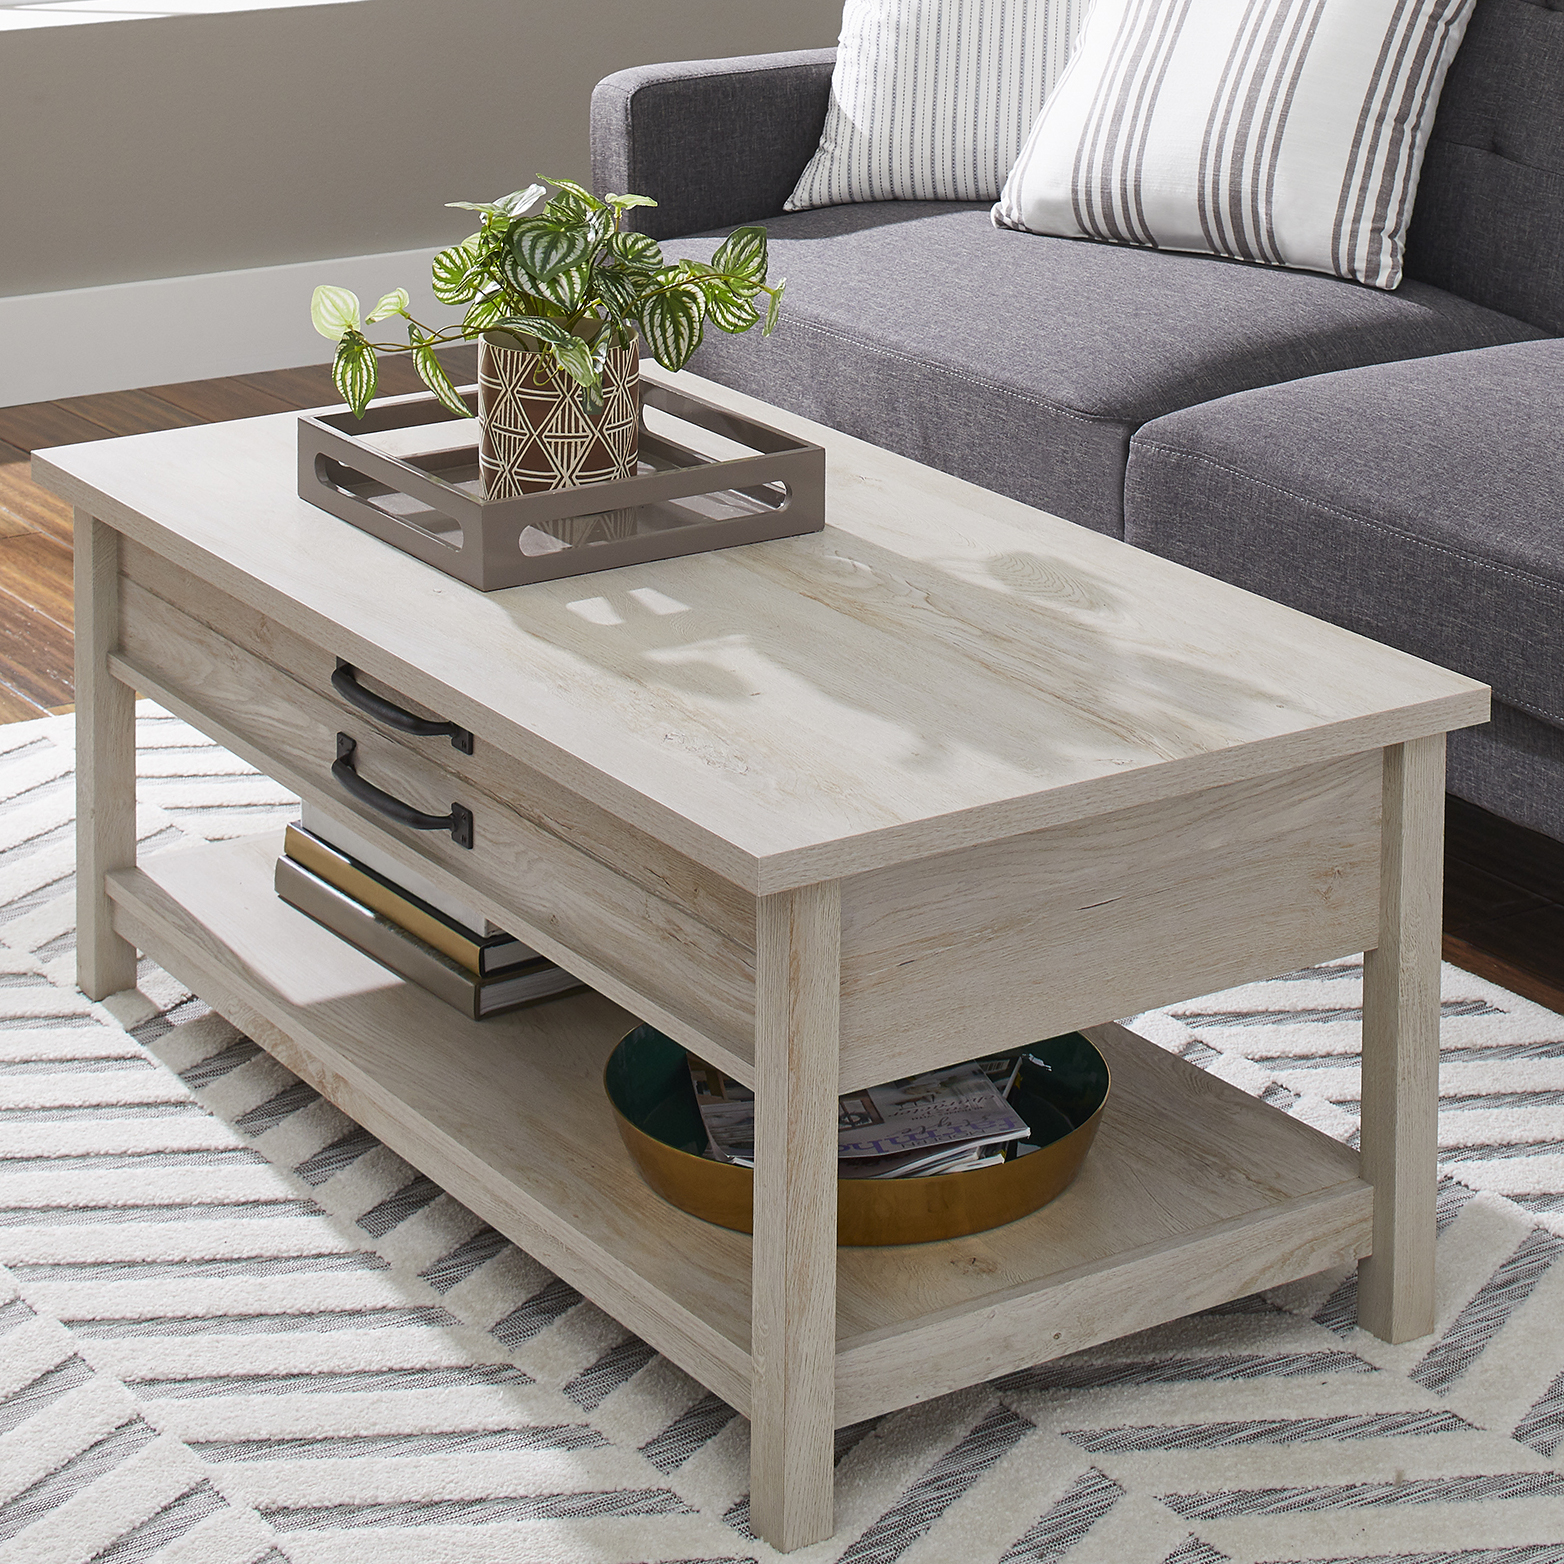 Better Homes & Gardens Modern Farmhouse Rectangle Lift Top Coffee Table, Rustic White Finish - image 1 of 16